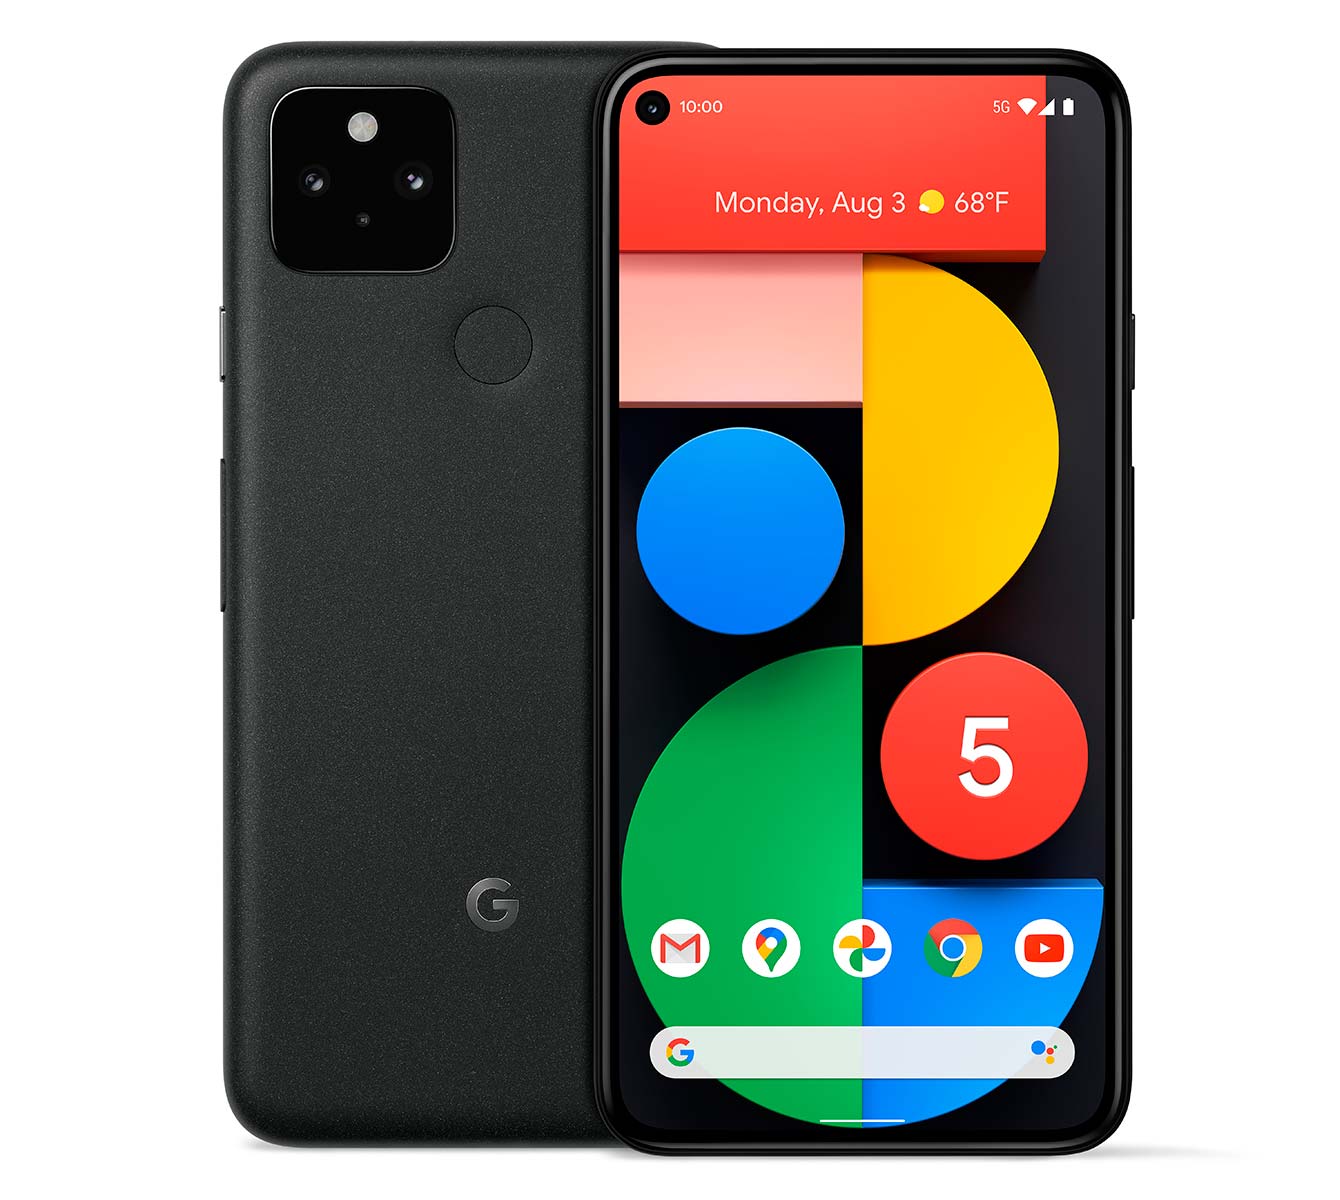 Google Pixel 5 official with 6-inch 90Hz display, 4000mAh battery 